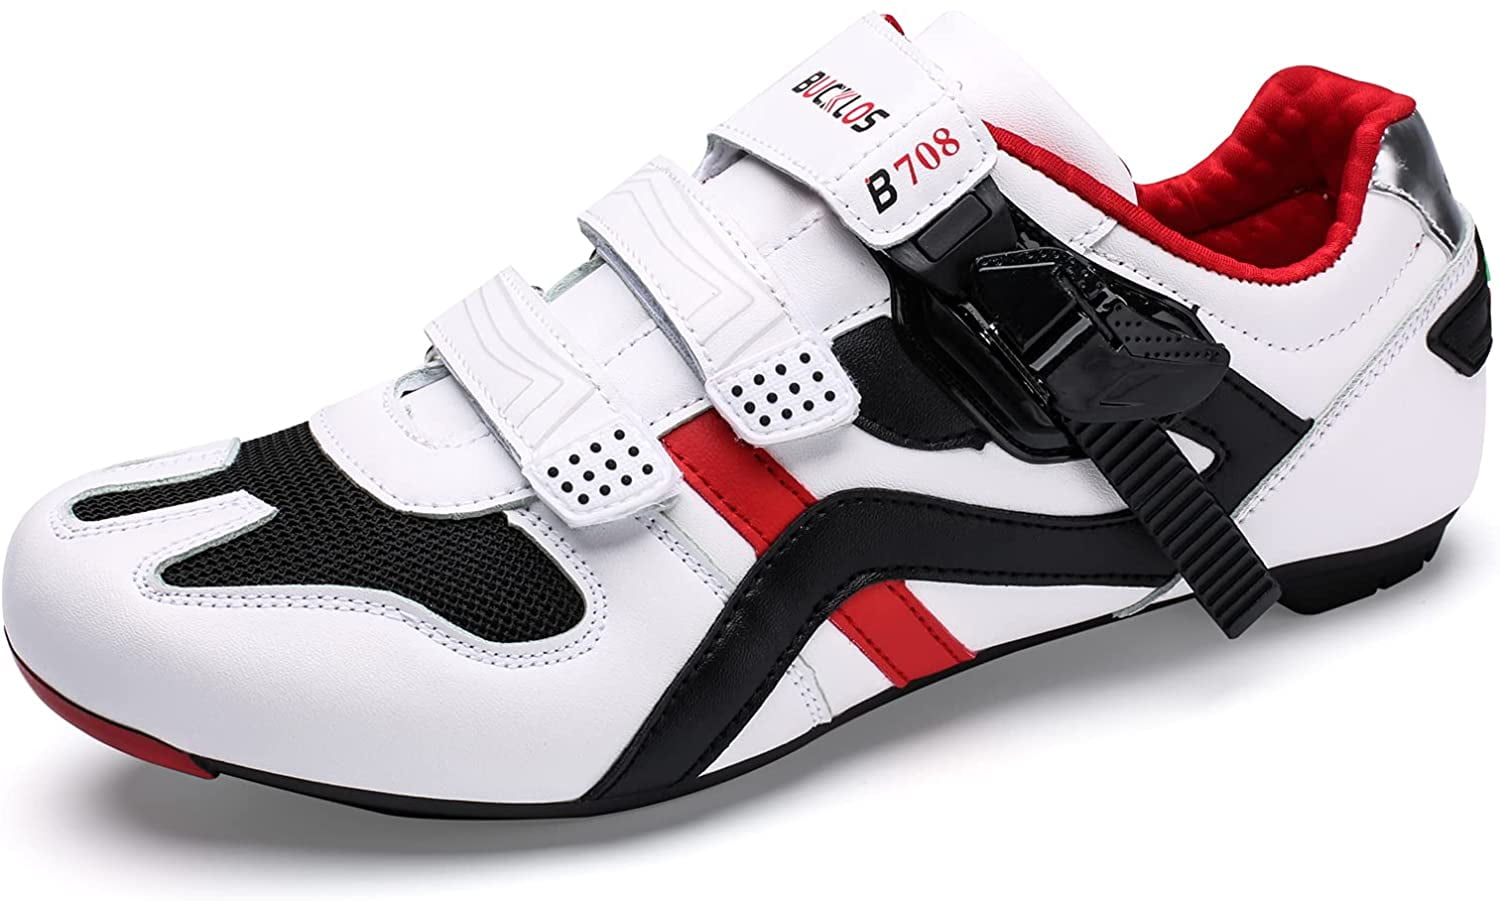 Details about   Ultralight Cycling Shoes Men Road SPD Cleats Bike Spin Sneaker MTB Bicycle Shoes 